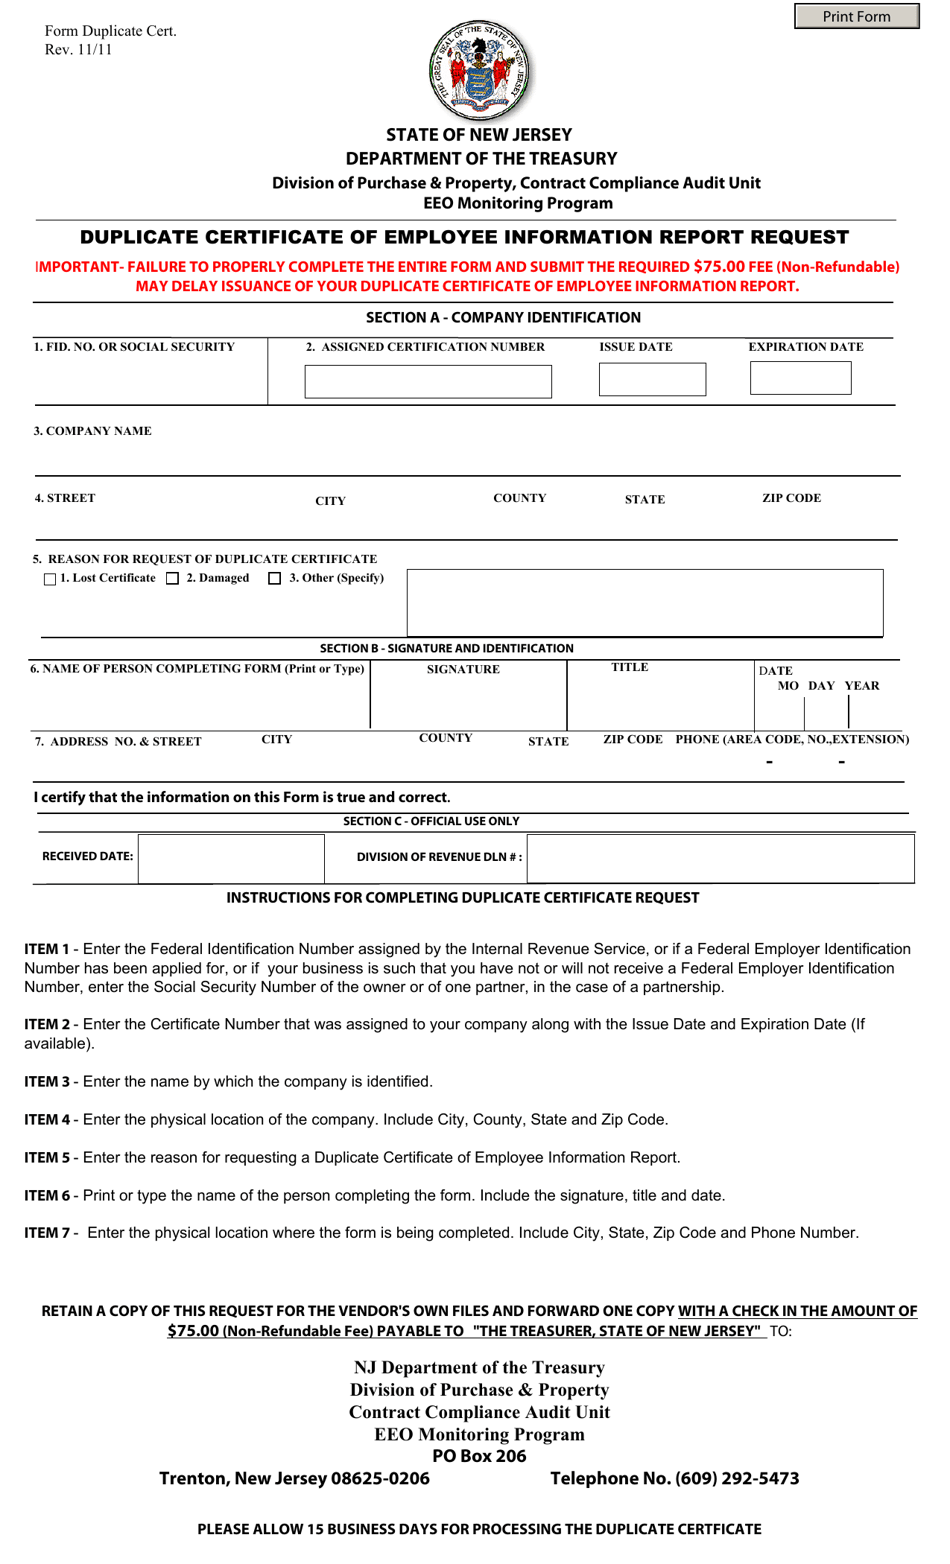 Duplicate Certificate of Employee Information Report Request - New Jersey, Page 1